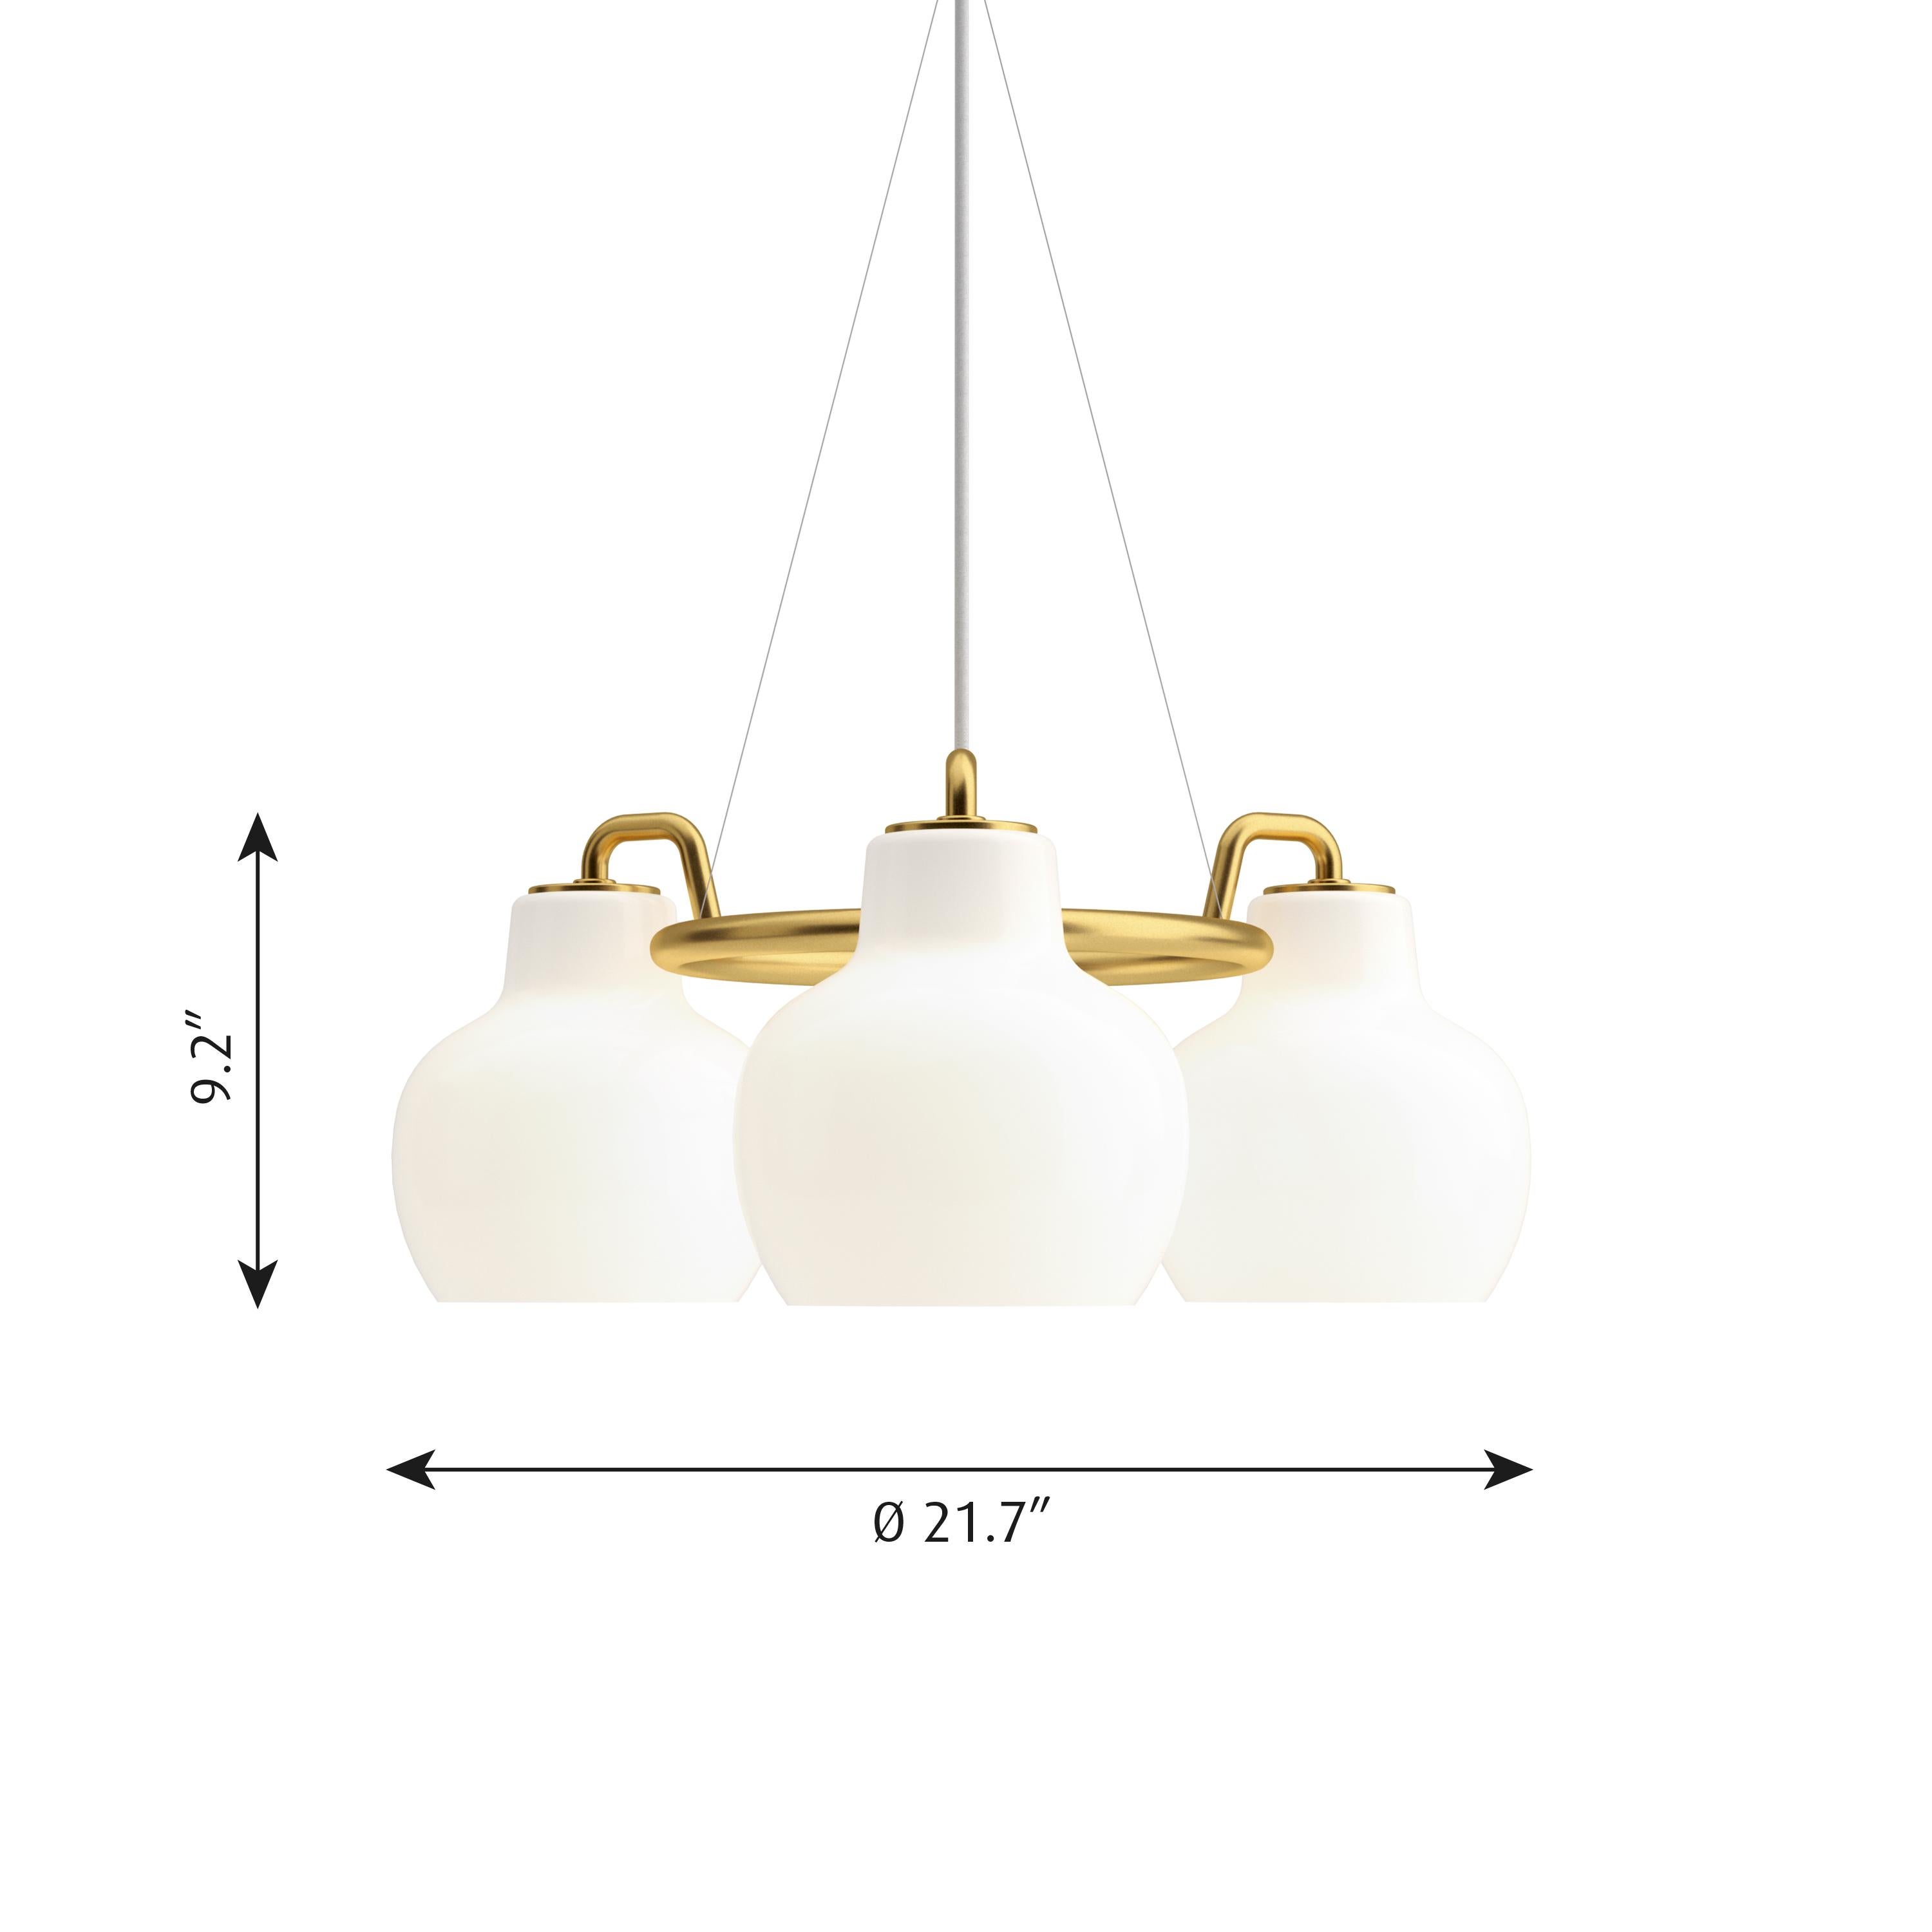 Vilhelm Lauritzen 3-shade brass and glass ring chandelier for Louis Poulsen. Executed in three hand blown glossy white opal glass and untreated polished brass tube and ceiling canopy. The chandelier emits light directed primarily downwards. The opal